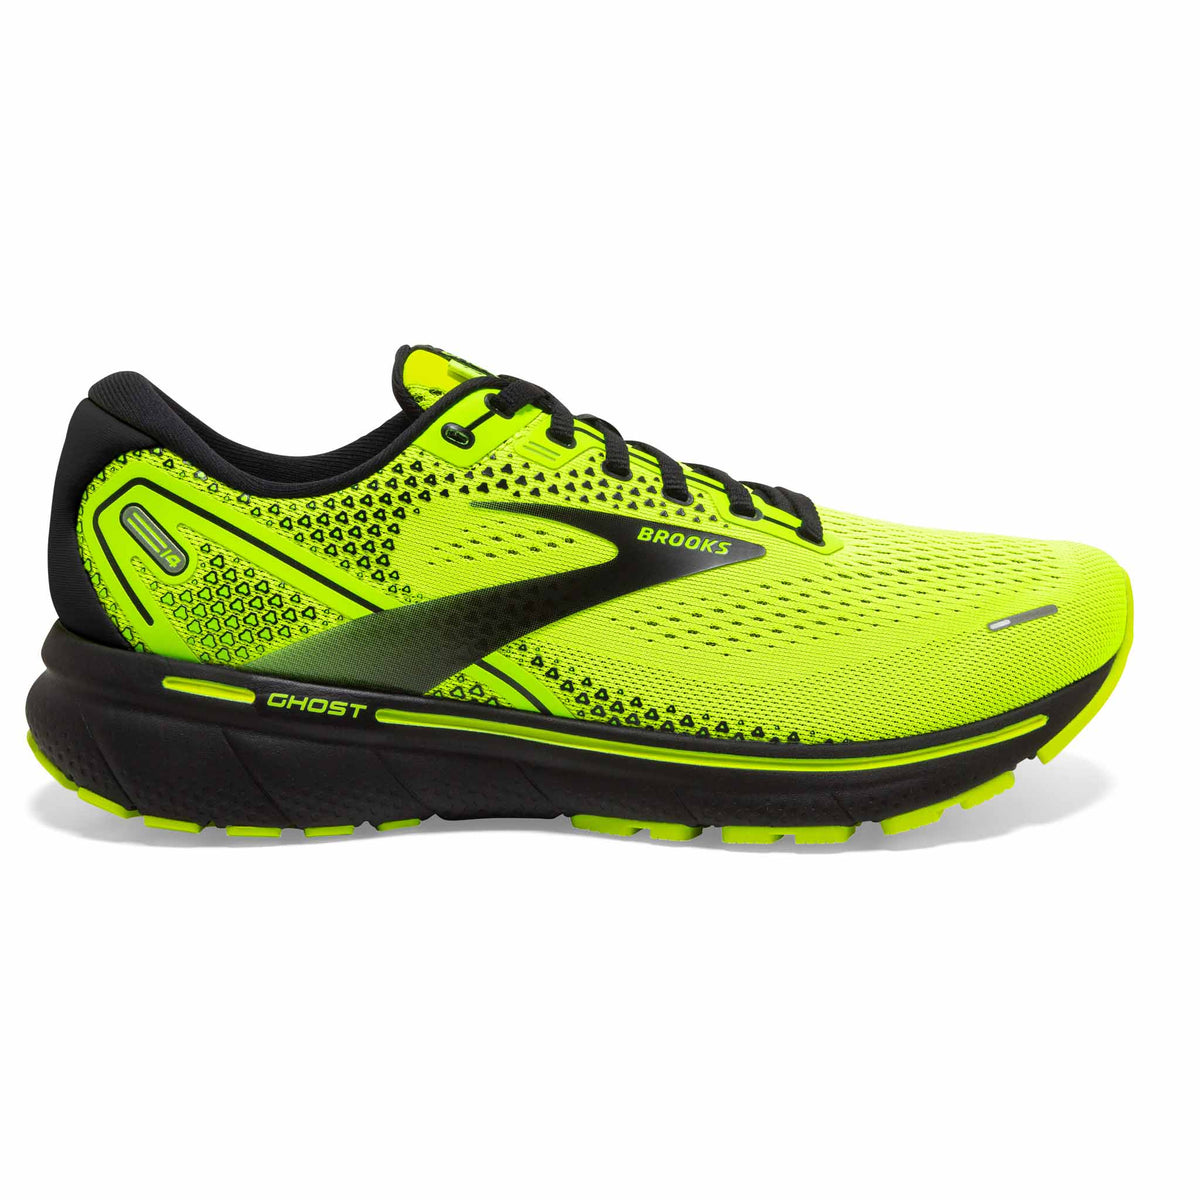 Brooks Ghost 14 chaussures de course a pied pour homme - Nightlife / Black